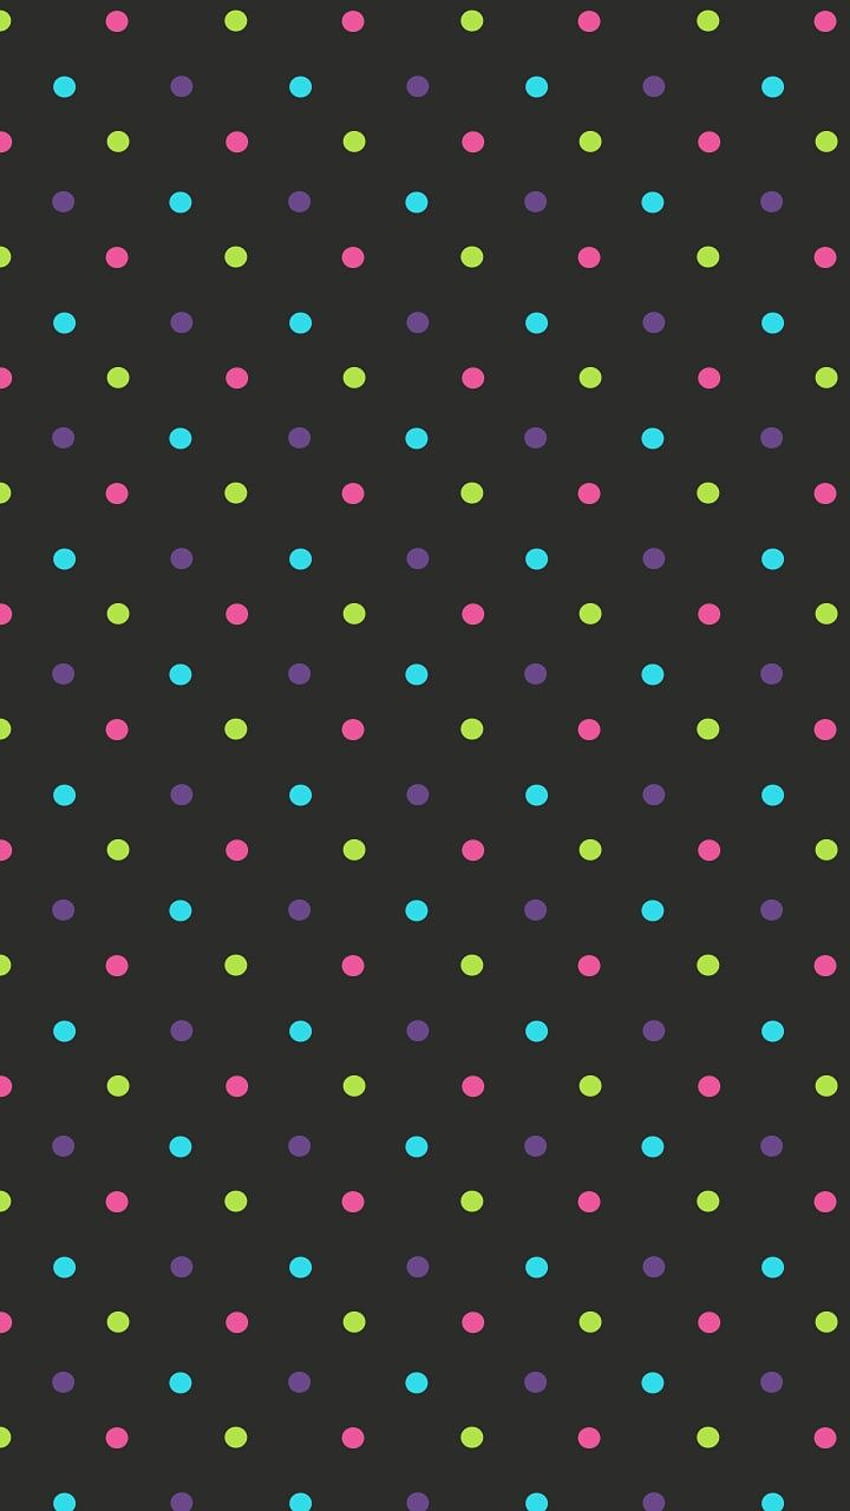 art, background, beautiful, beauty, black, black background, colorful, colour, cute art, design, dots, iphone, kawaii, pattern, patterns, polka dot, rainbow, style, texture, we heart it, white, white color, black+white, beautiful art, rainbow dots HD phone wallpaper